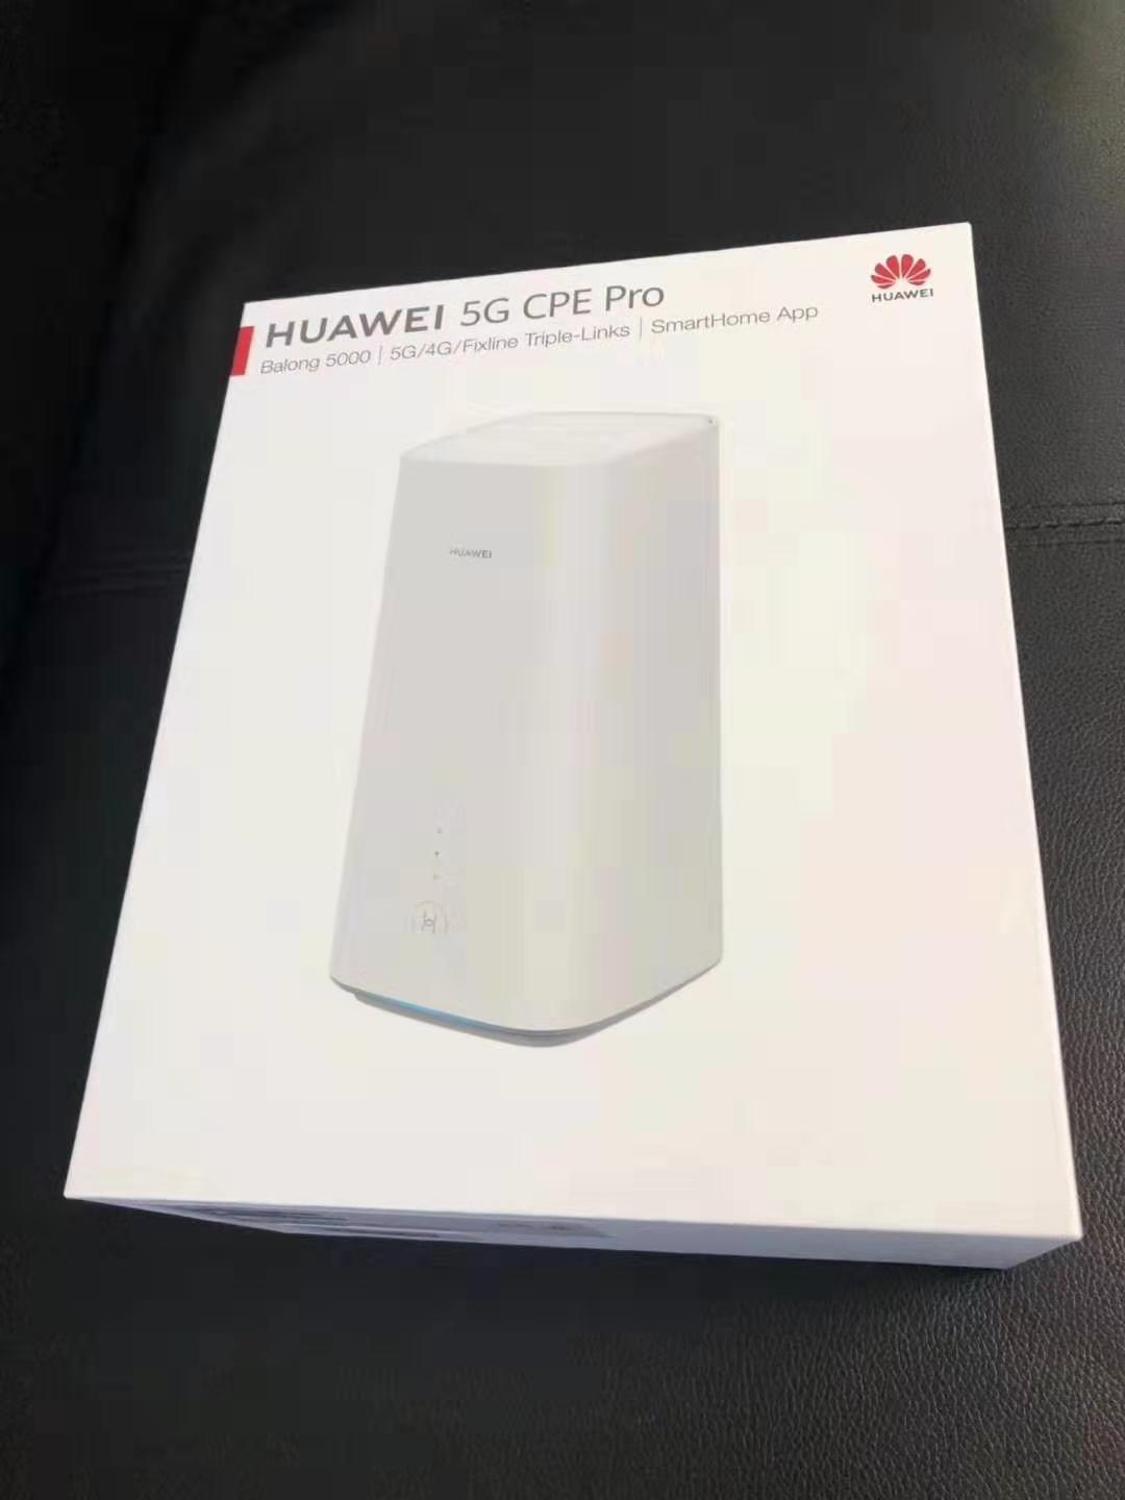 Huawei 5G CPE Pro(H112-372) 5G NSA+SA(n41/n78),4G LTE(B1/3/5/7/8/18/19/20/28/32/34/38/39/40/41/42/43) Wireless Home Router